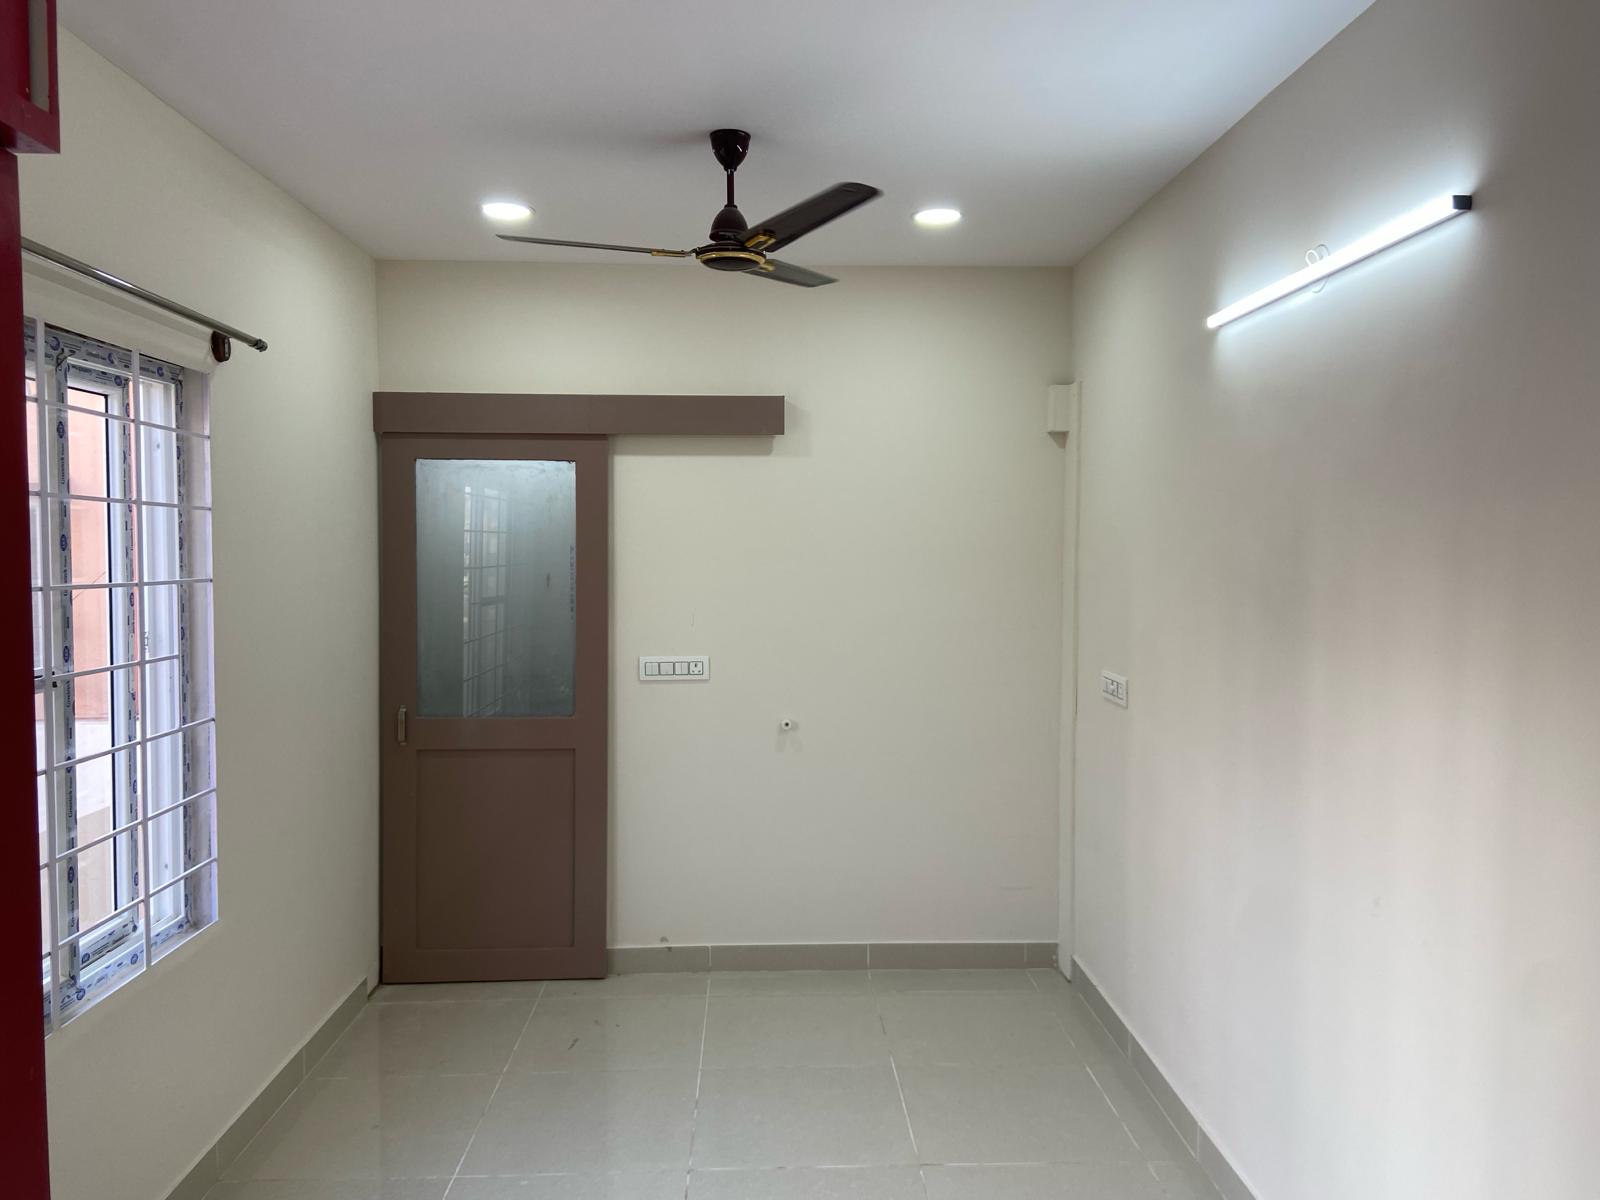 2 BHK Independent House for Lease Only at JAM-6604 in Srinivasa Nagar